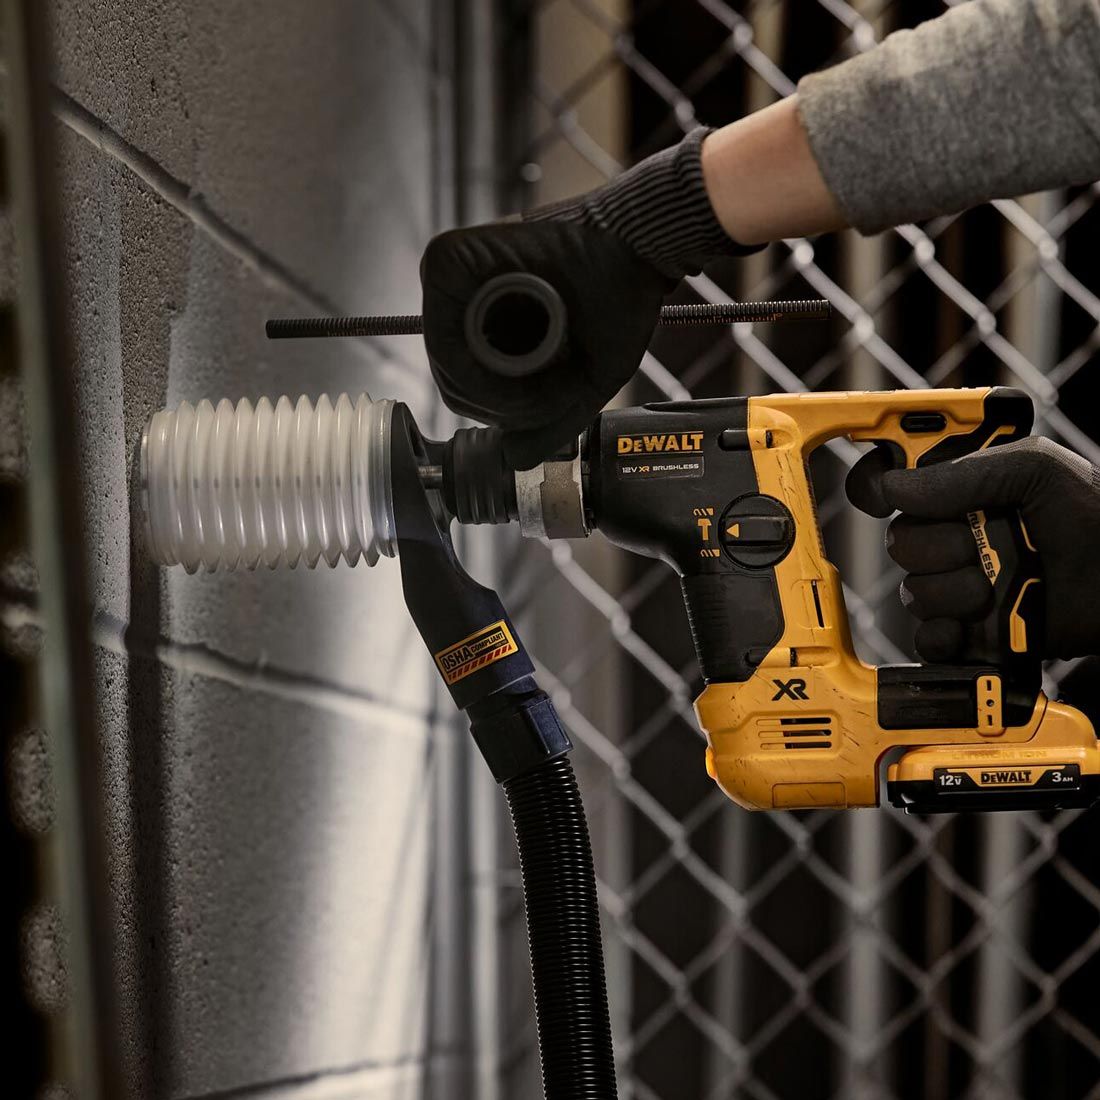 DeWalt DCH072N -KR Ultra Compact Brushless Cordless SDS-Plus Rotary Hammer 12V XR Li-Ion DCH072 ( Bare Tool Only )